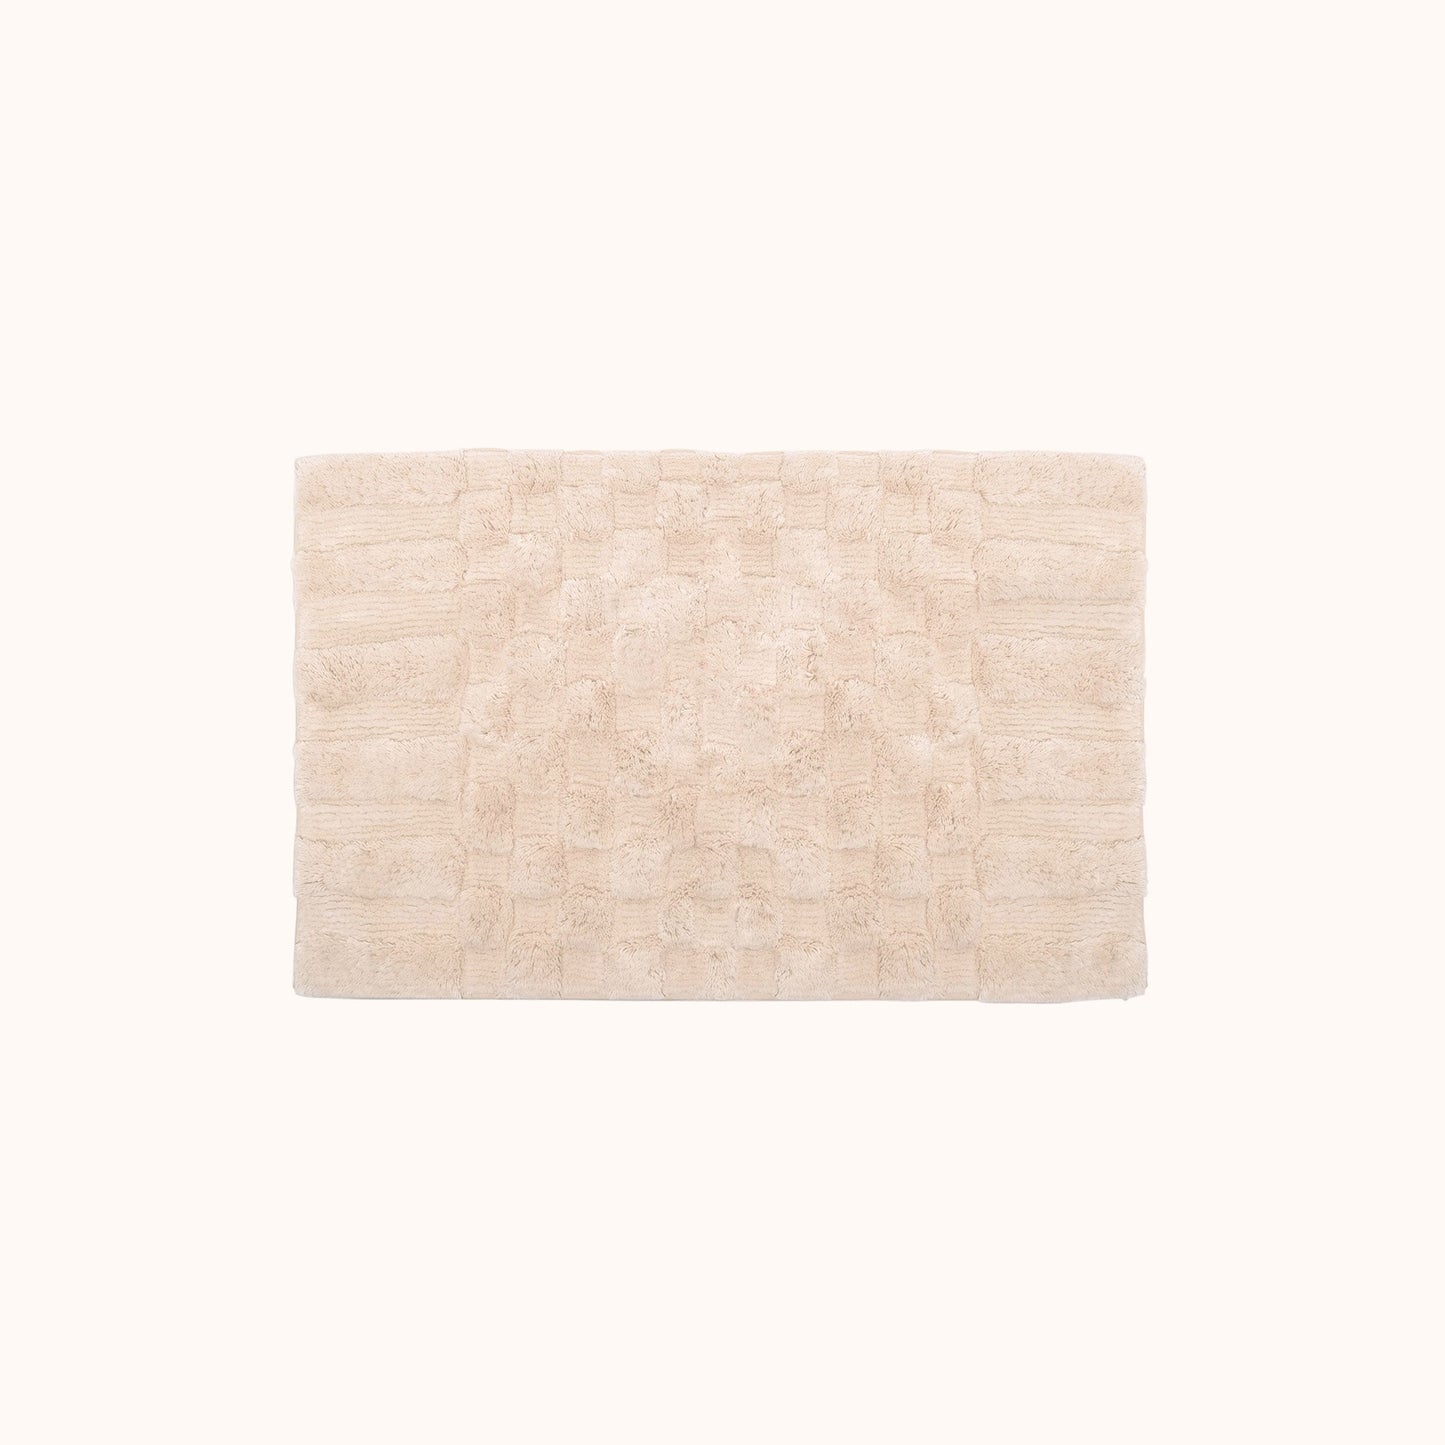 The Clea Bath Mat is a soft, neutral blush hue with a subtle check pattern created by contrasting shag heights. This bath mat is perfect for adding just a hint of color and texture. Ethically produced and hand made in India.